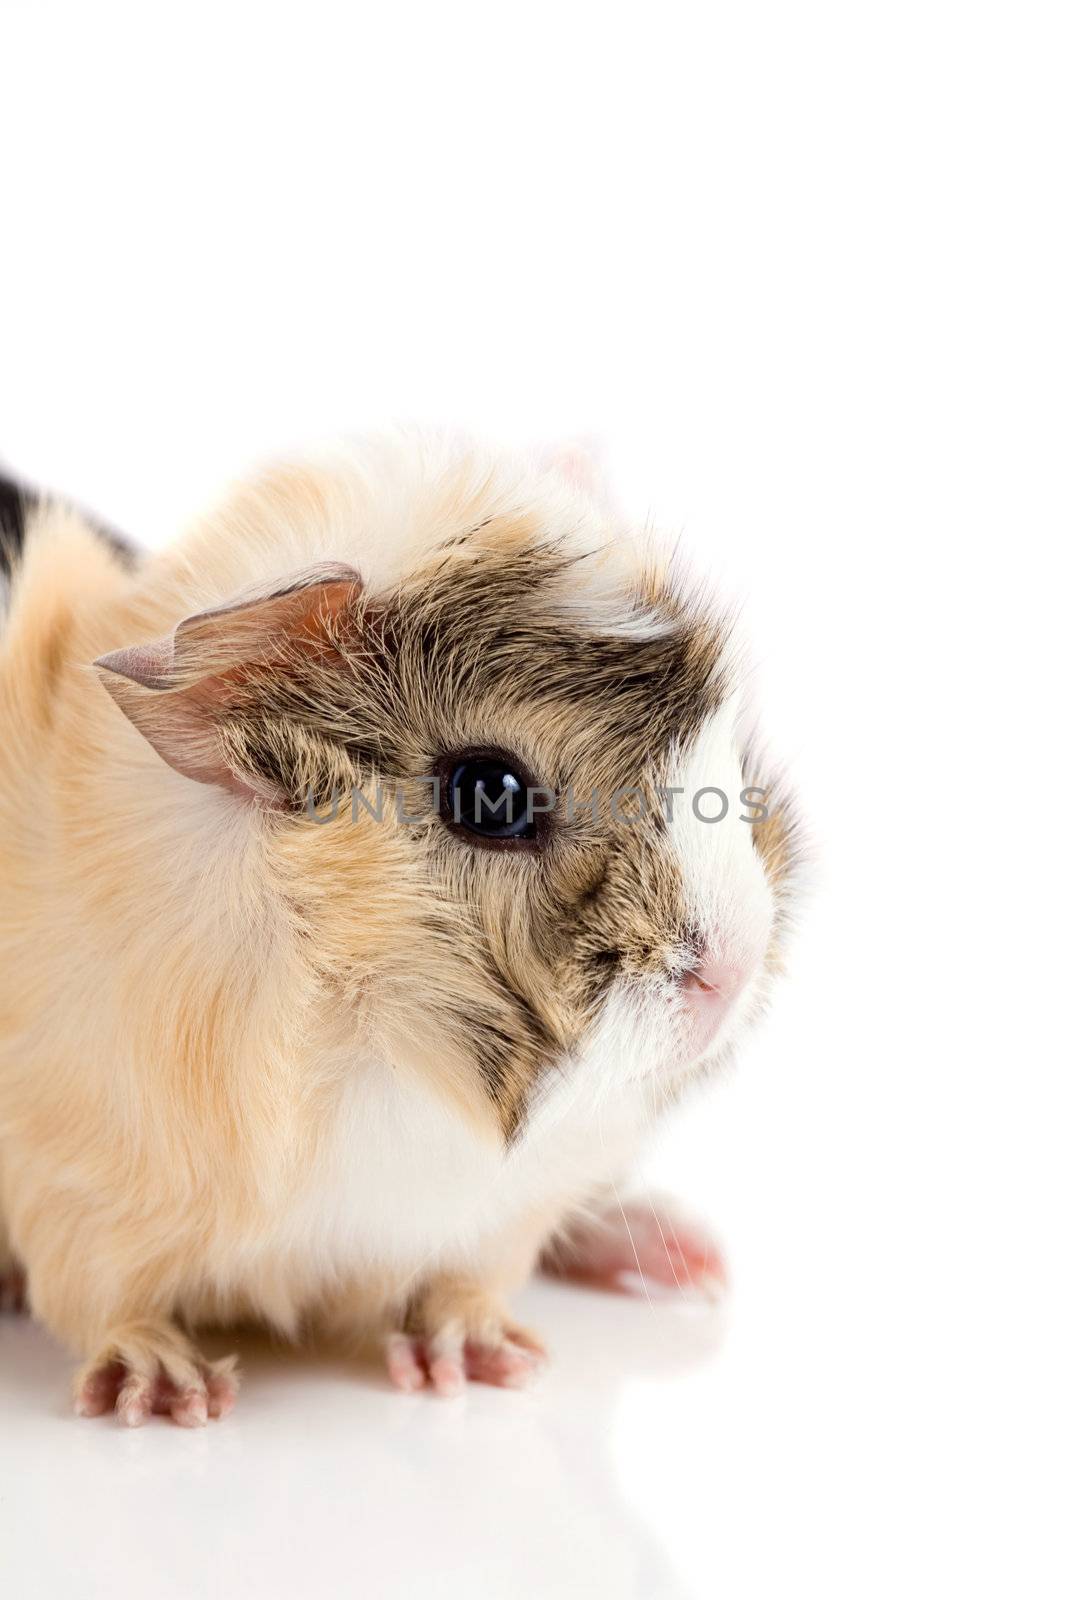 Cute little baby guinea pig on white background